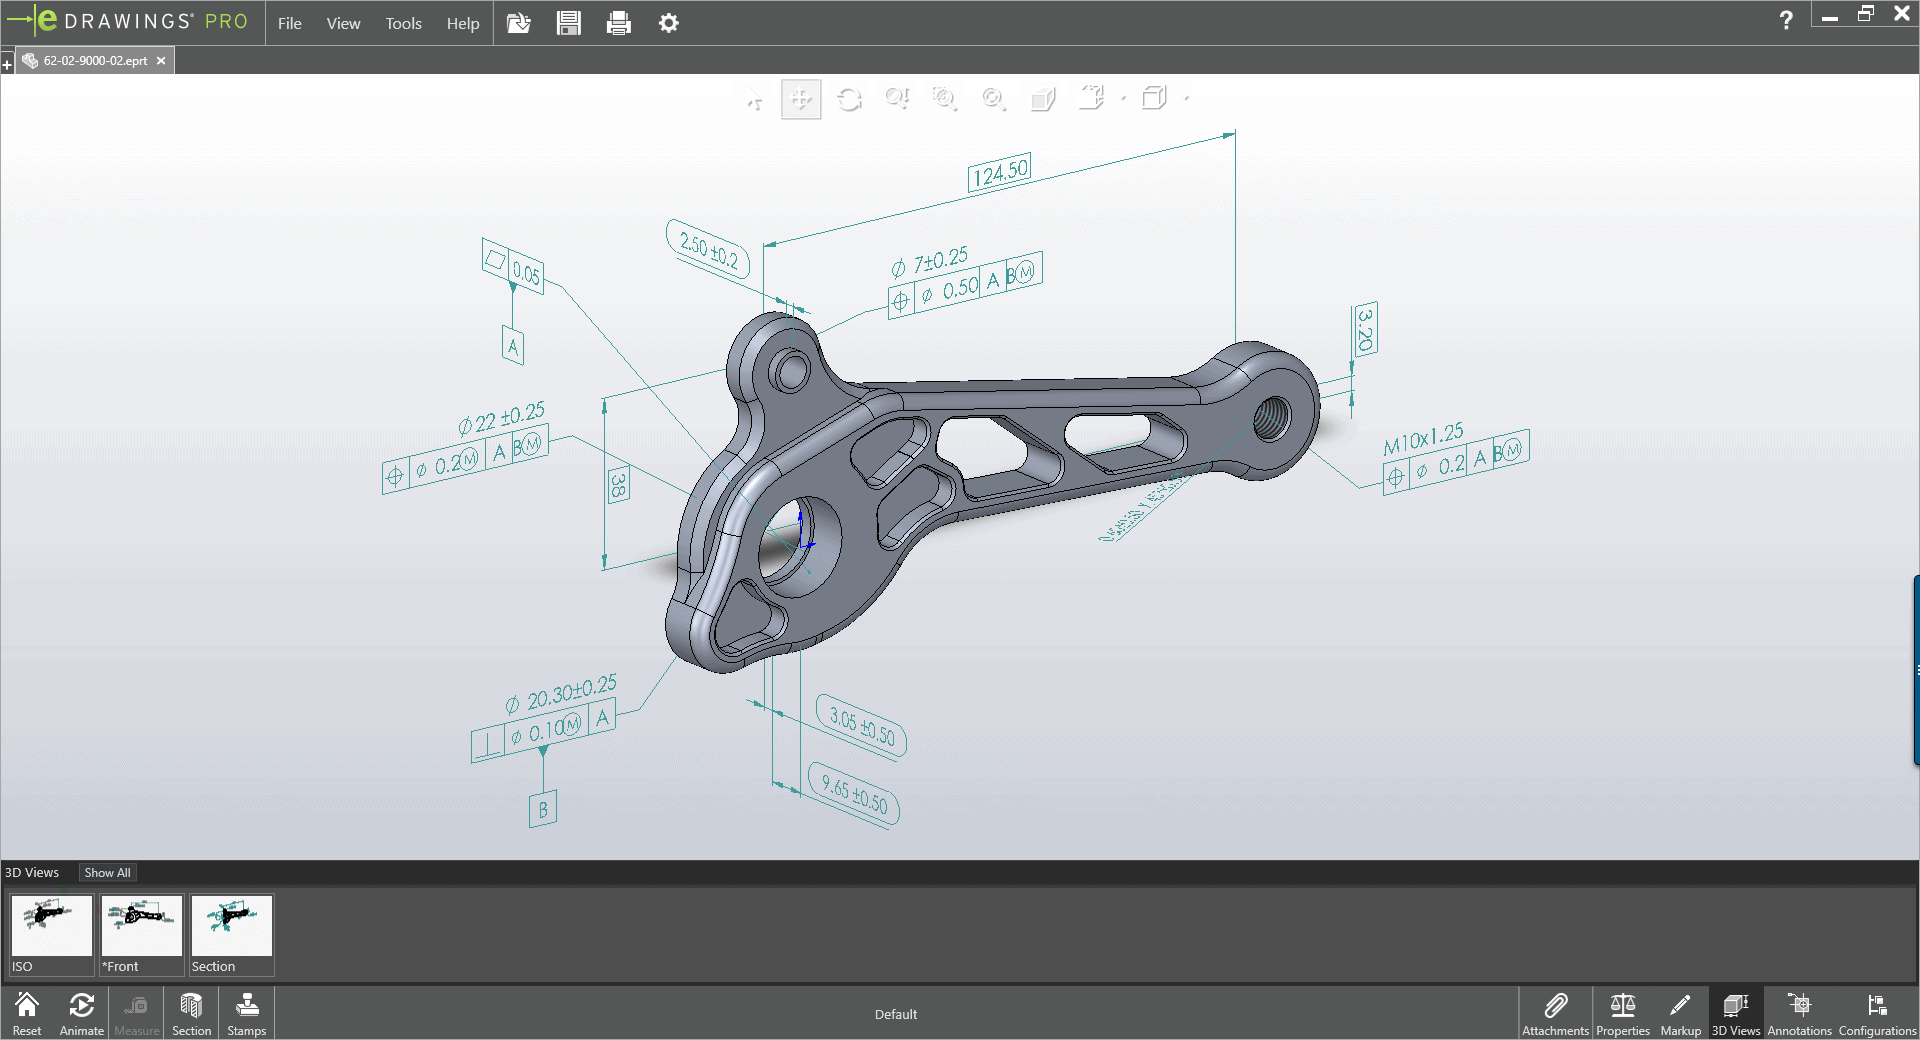 solidworks mbd, Using eDrawings with SOLIDWORKS Model Based Definition (MBD)